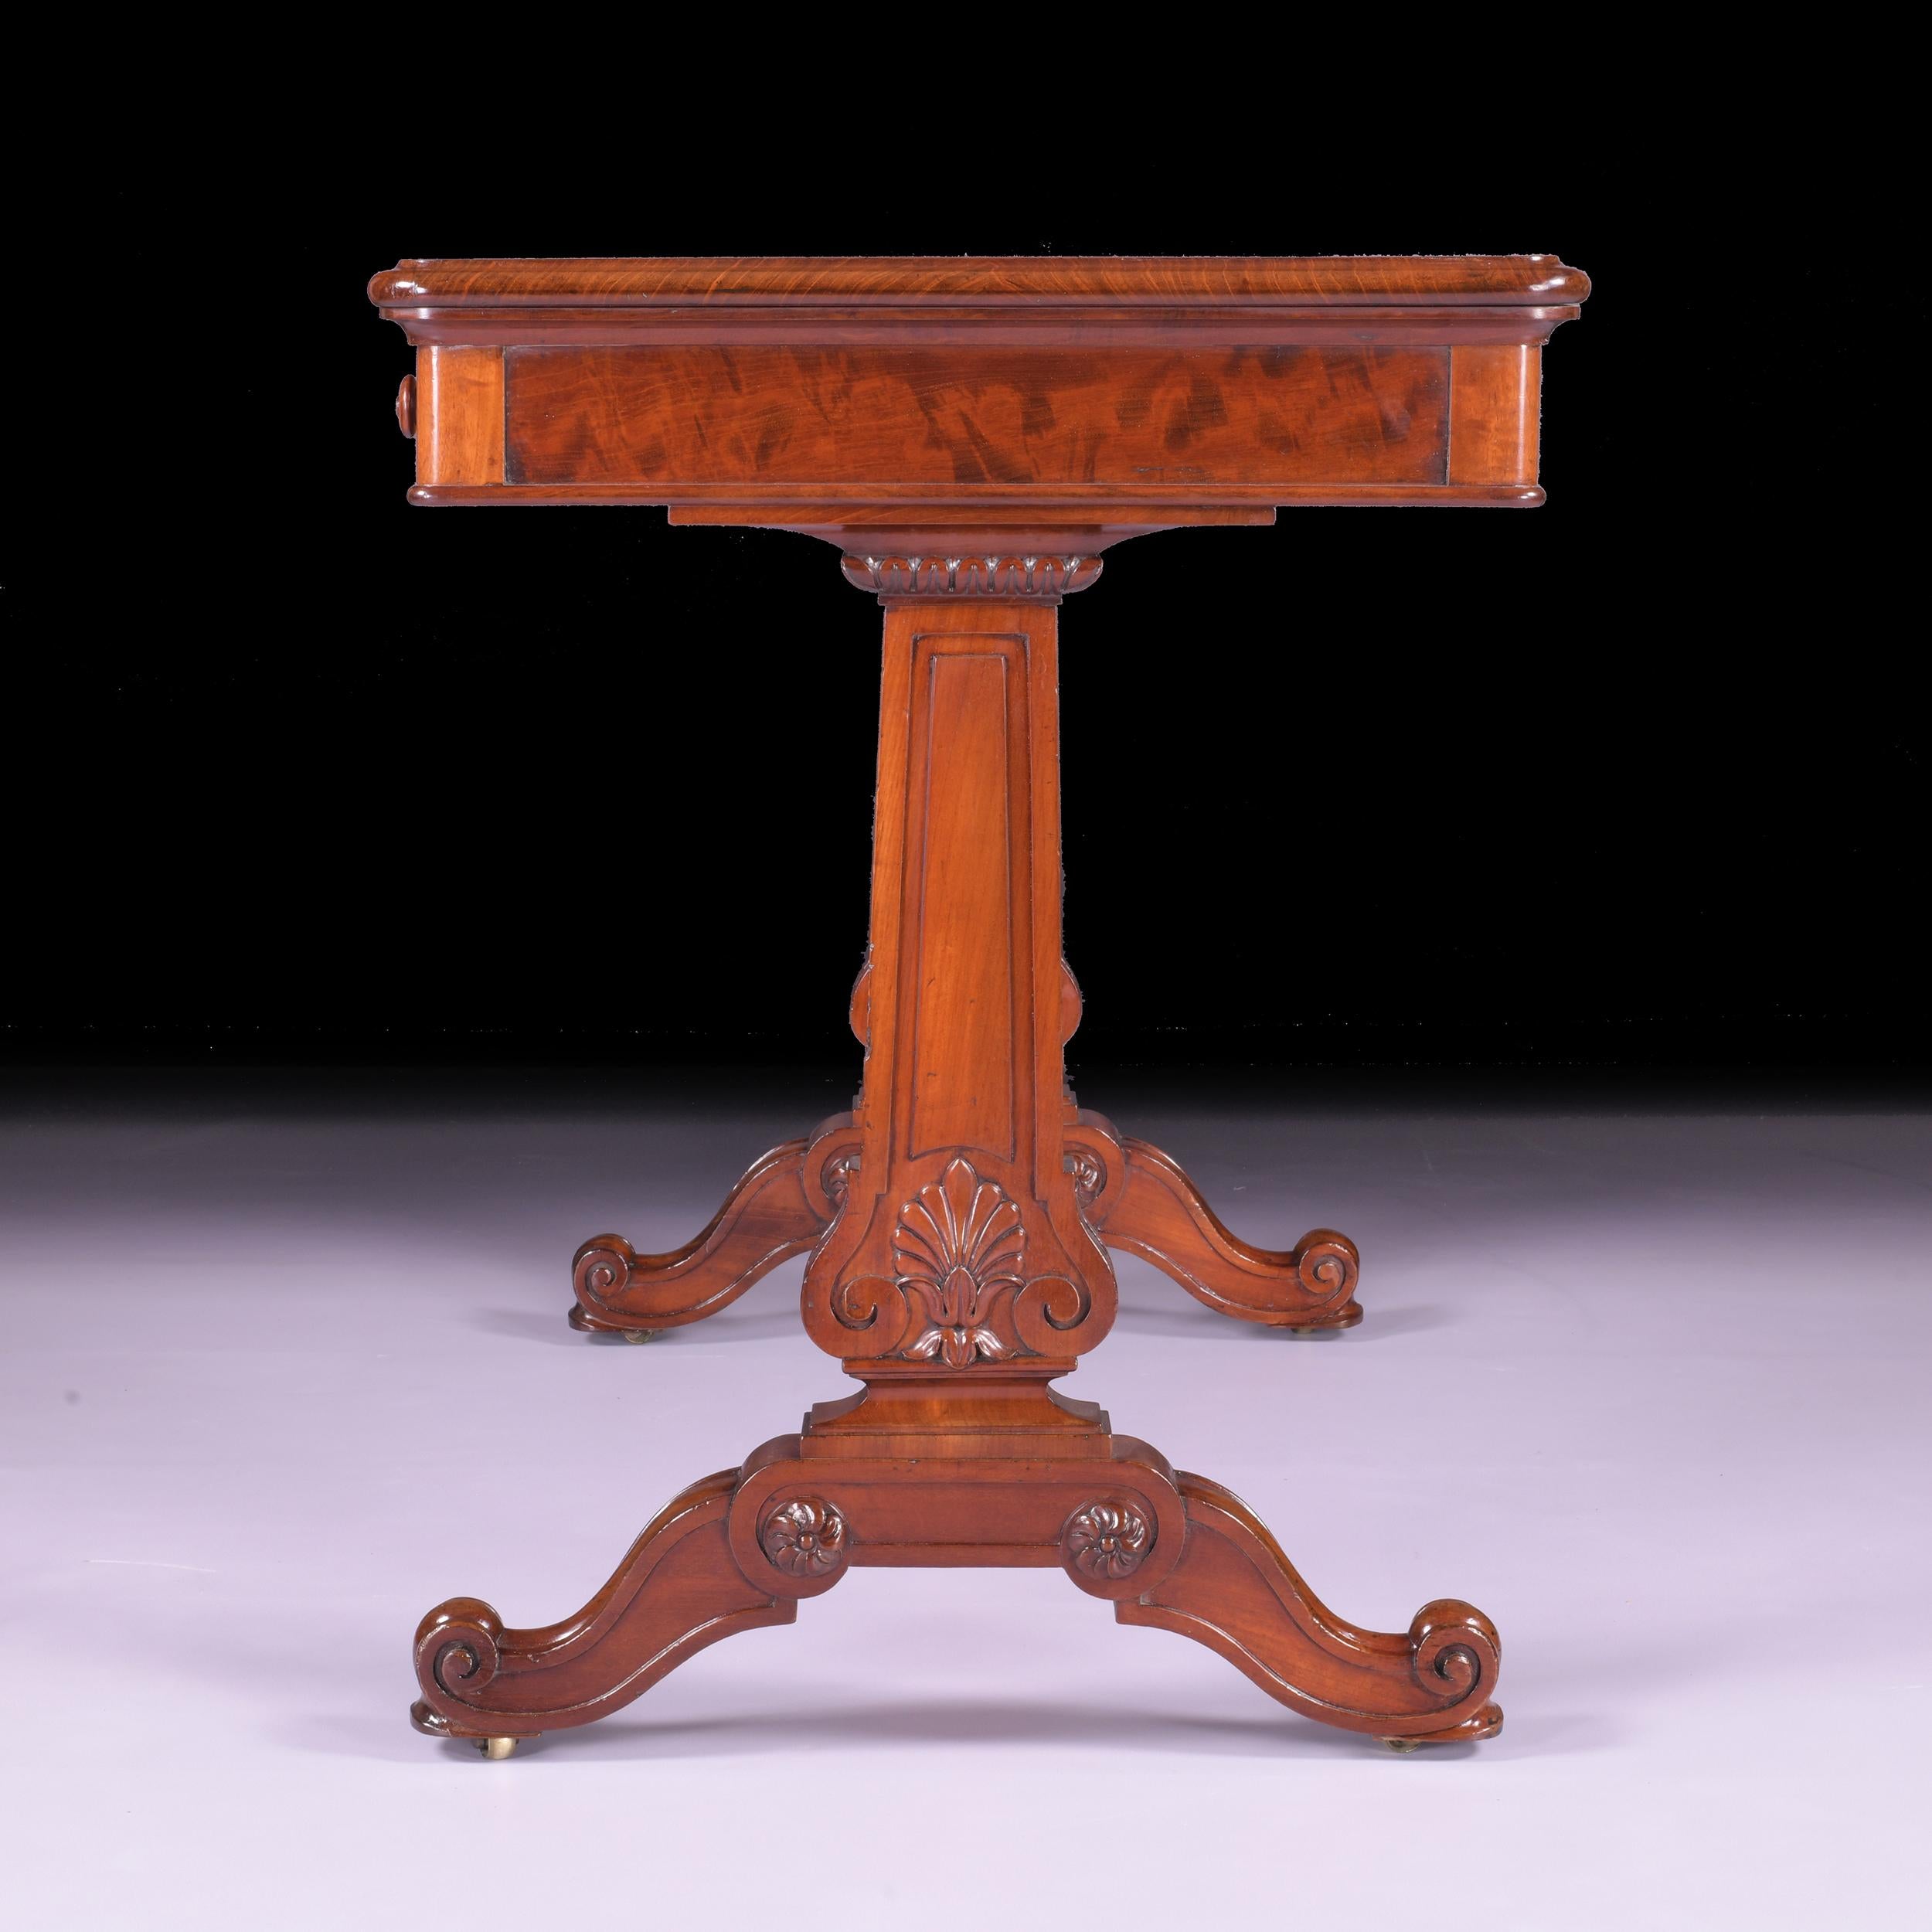 Early 19th Century English Regency Mahogany Library Writing Table by Holland & Sons